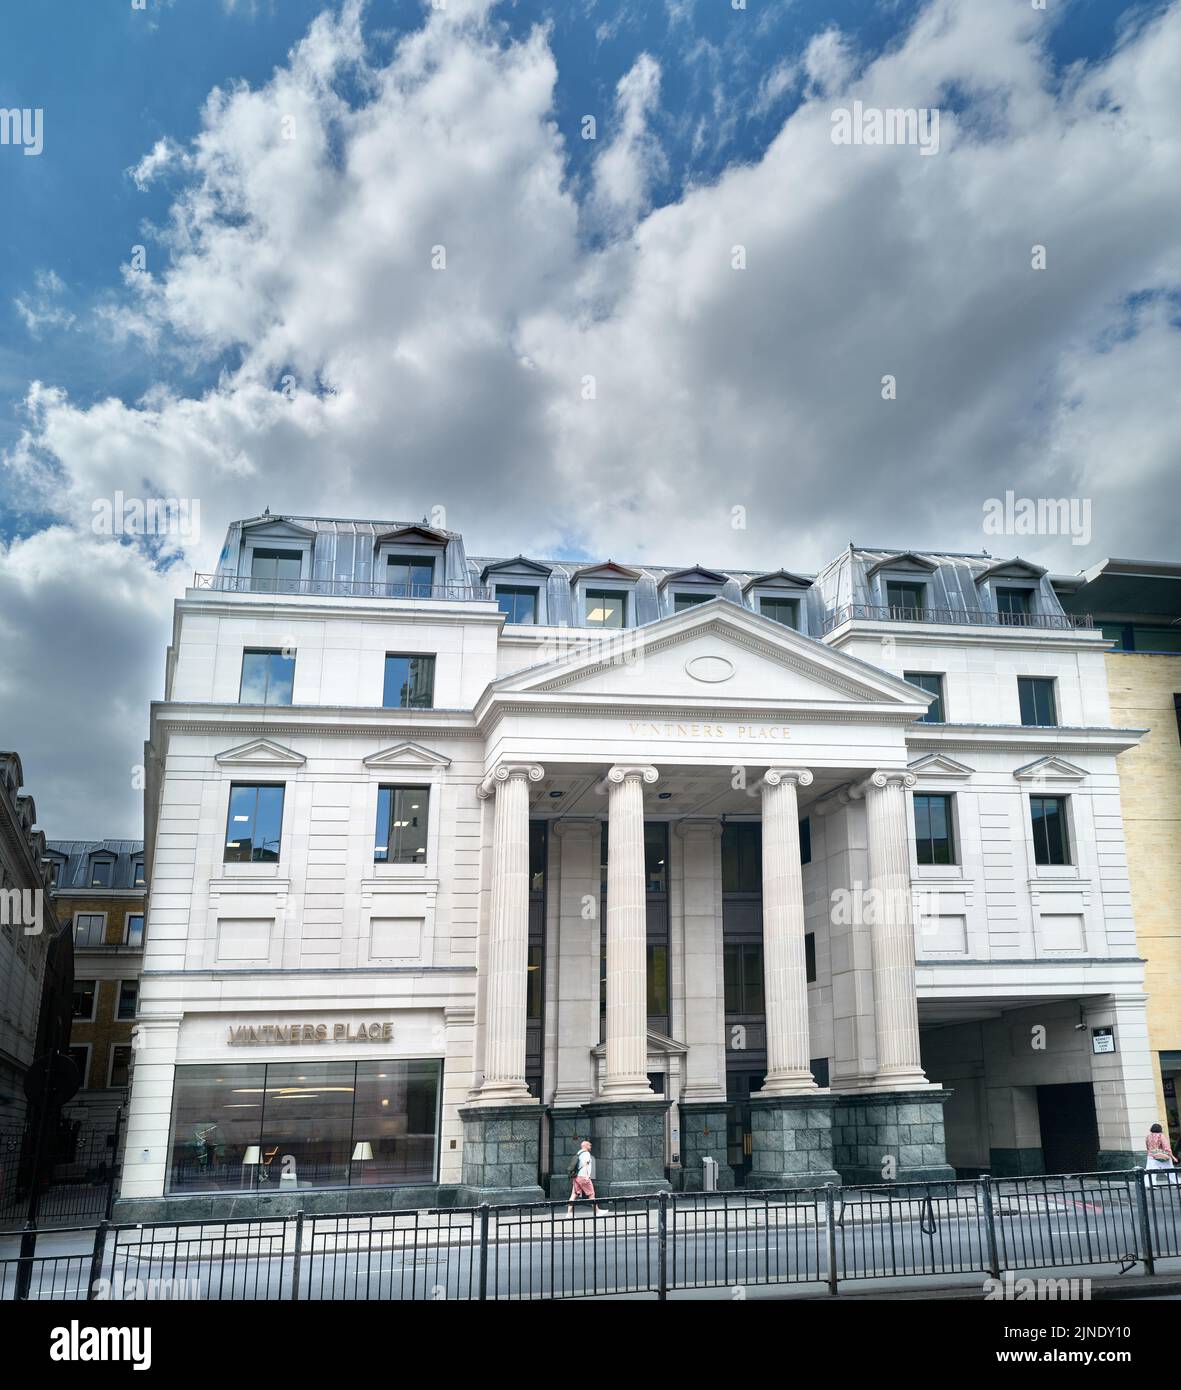 Vintners Place (or Hall), London, England. Stock Photo